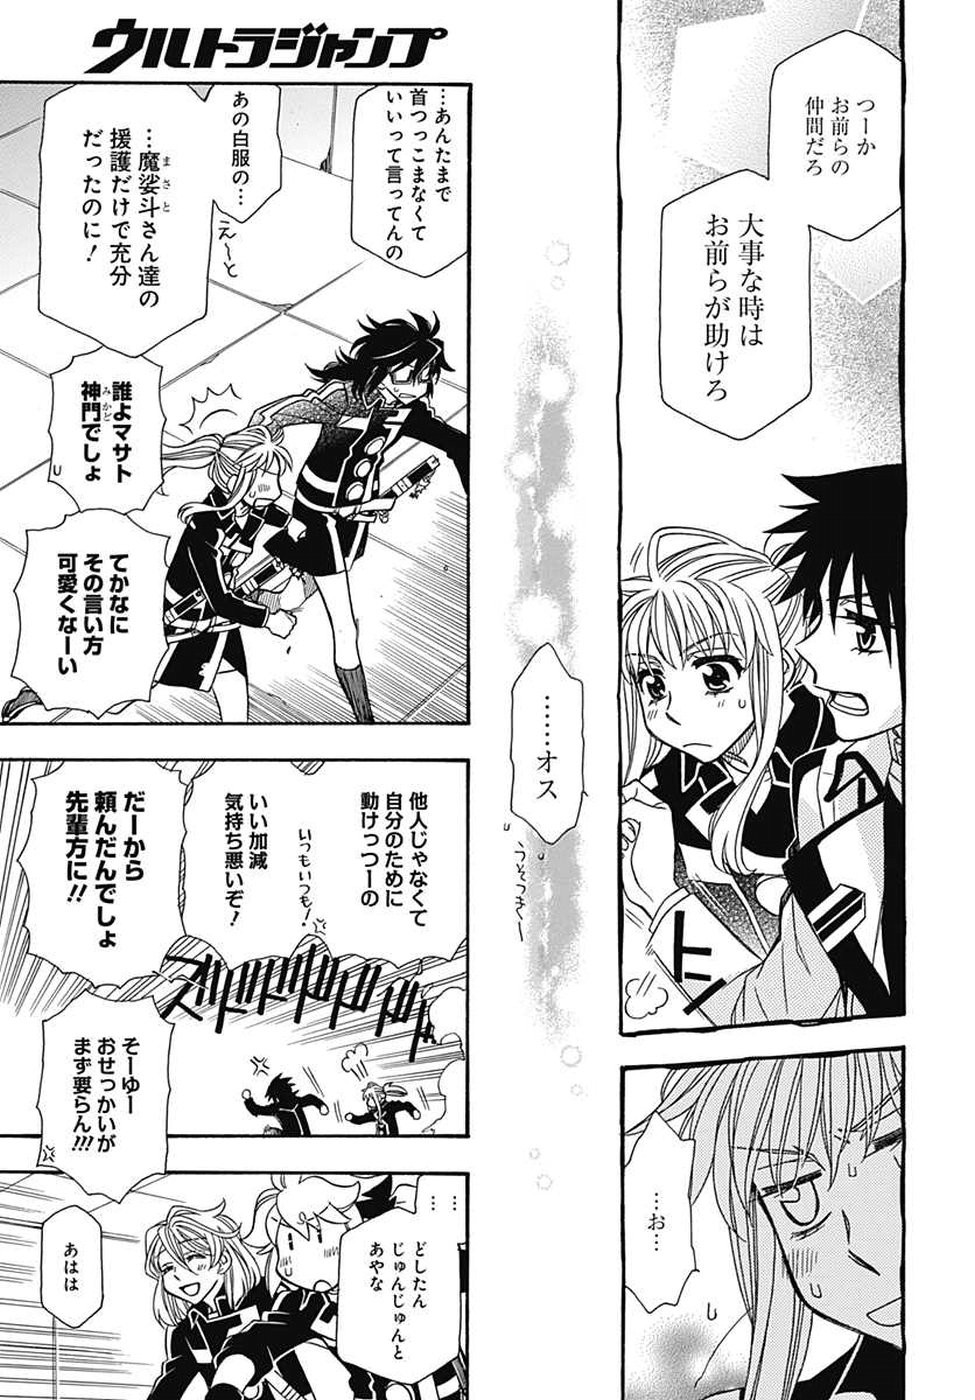 Hayate x Blade 2 - Chapter 034 - Page 3